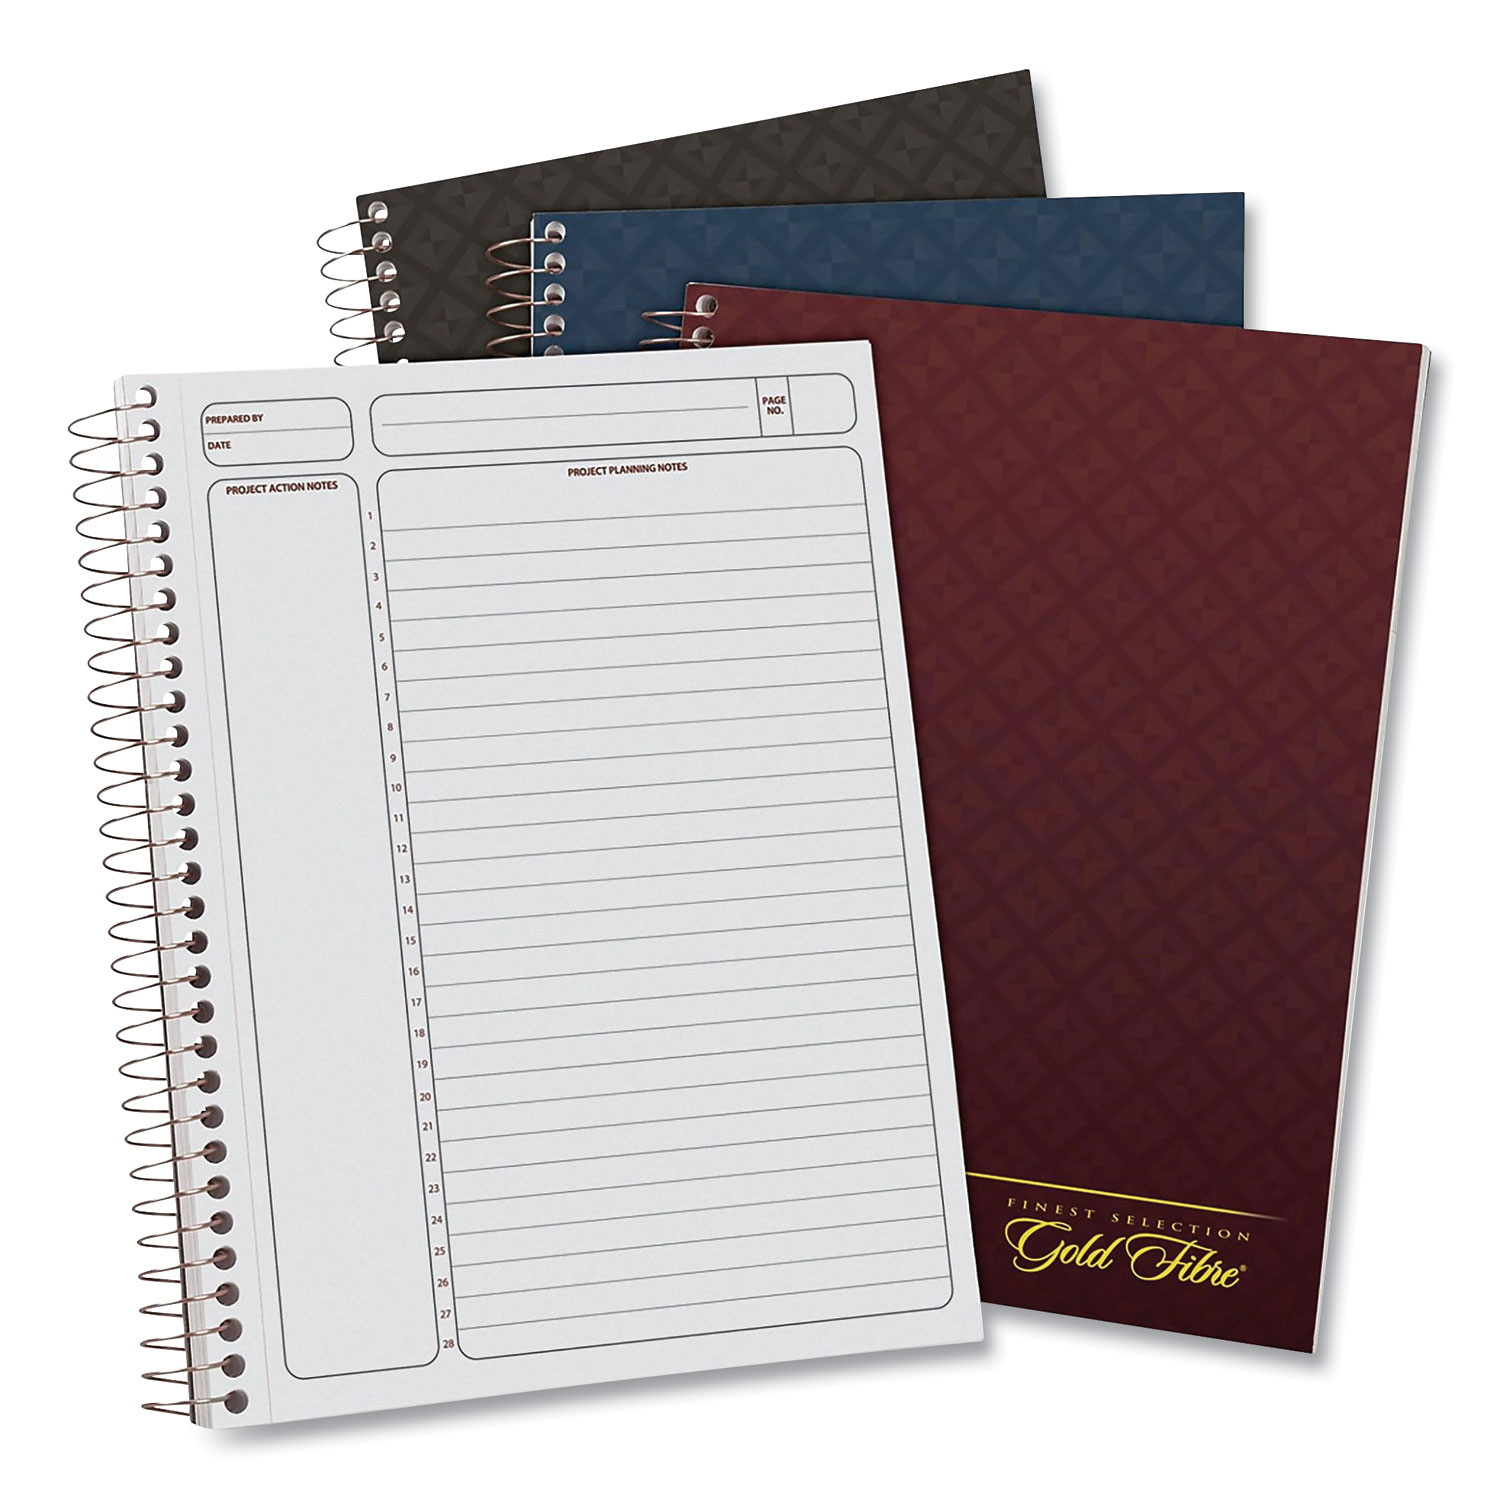 Ampad® Gold Fibre Project Planner, Cornell Rule, Randomly Assorted Covers, 9.5 x 7.25, 84 Sheets